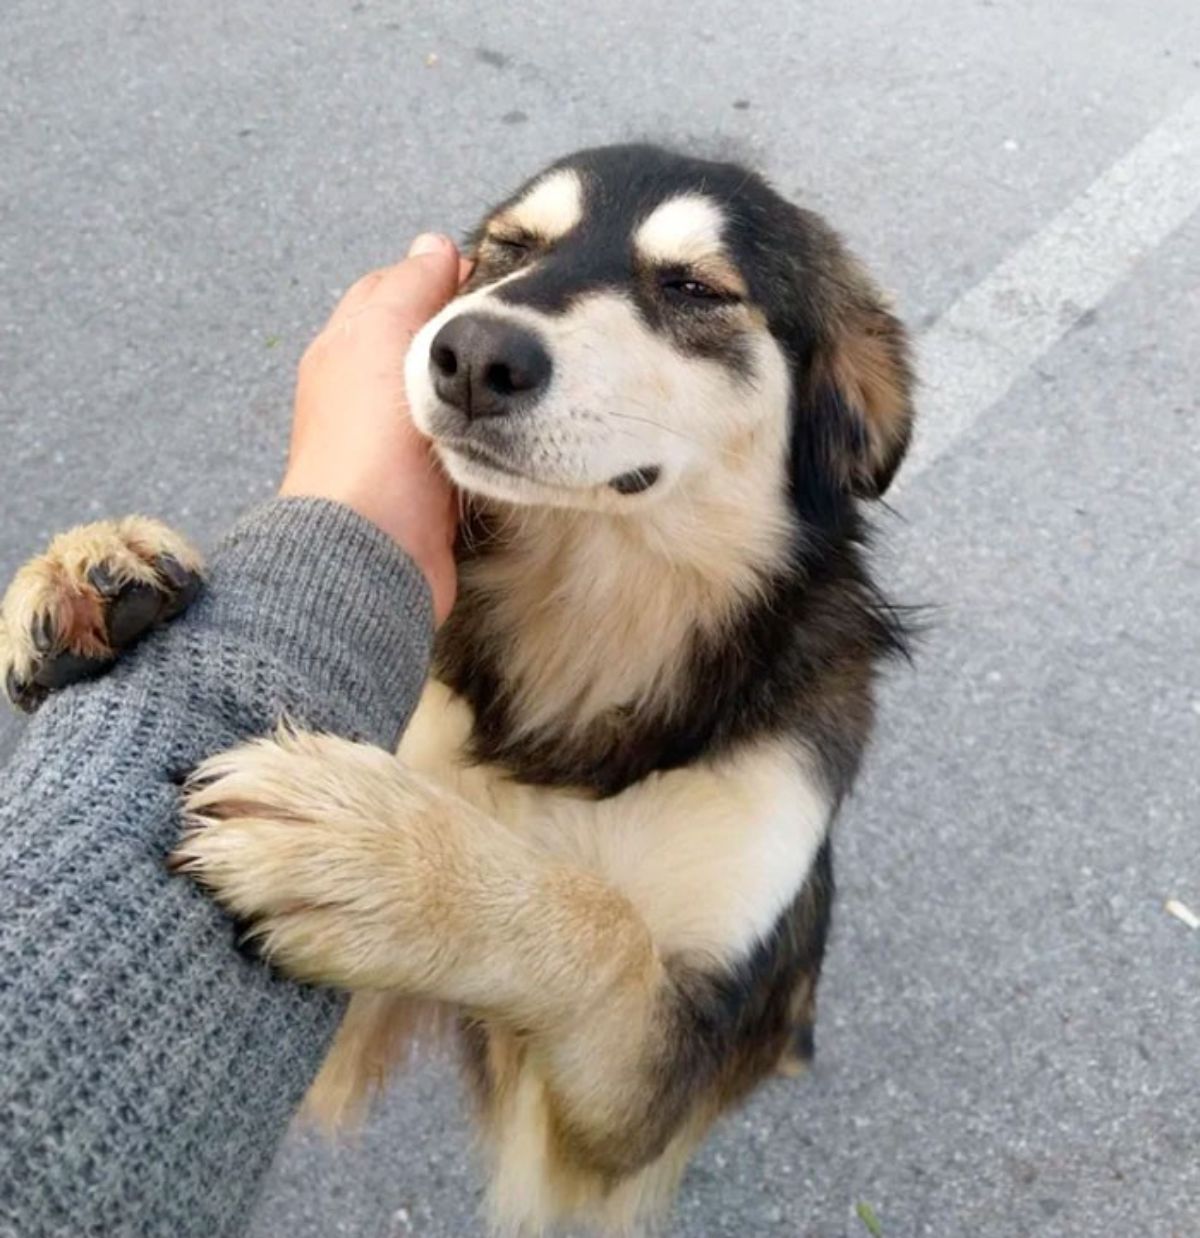 black and white dog hugging the arm of the person petting the dog